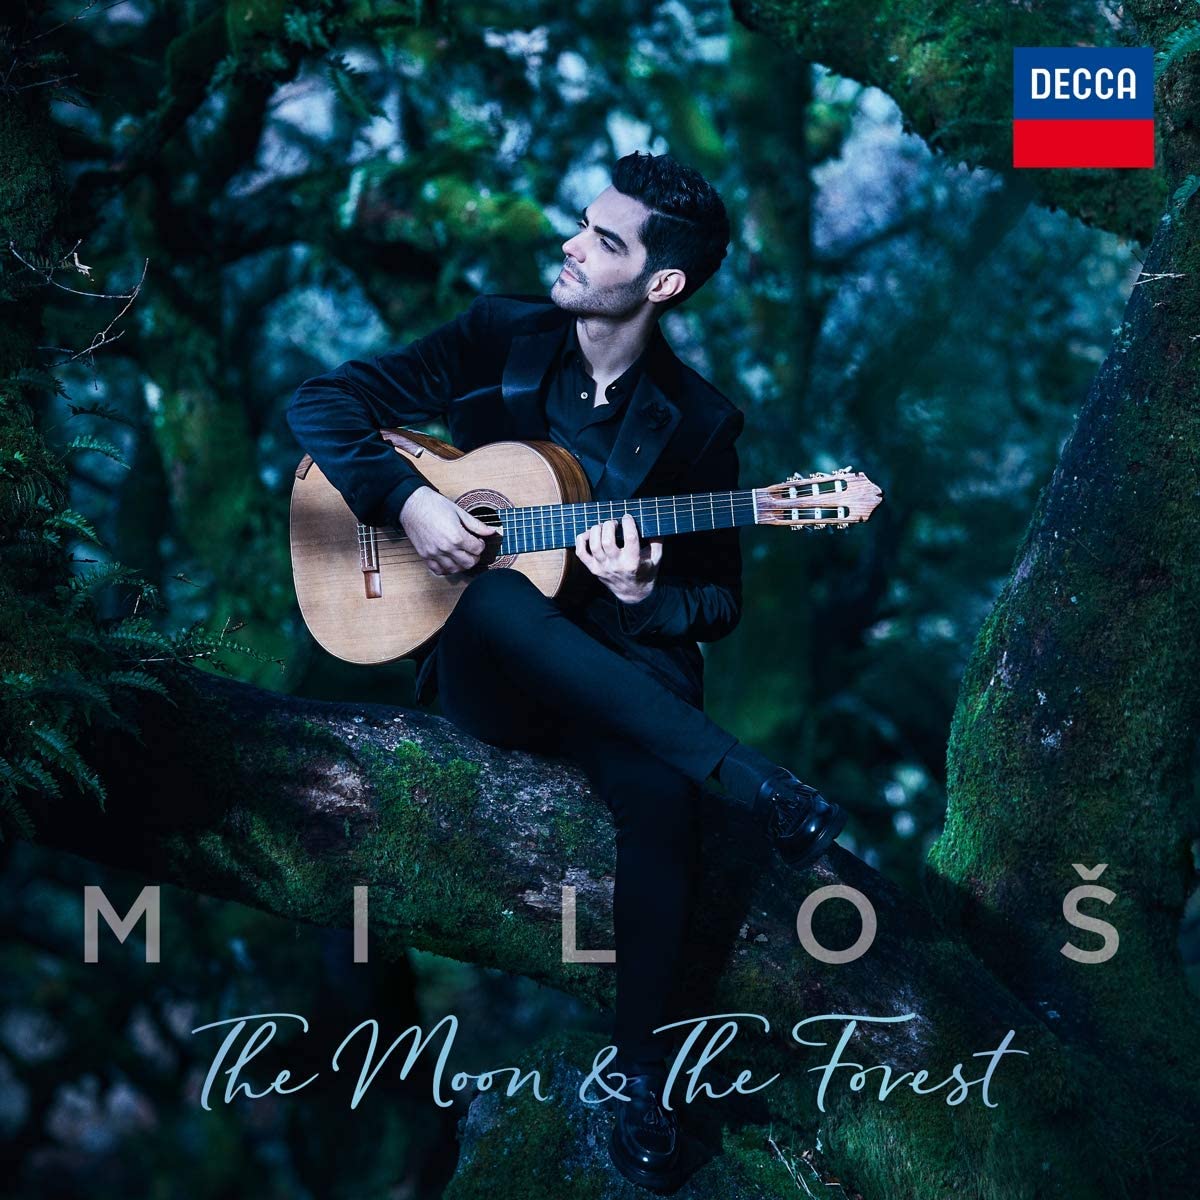 485 1525. Miloš: The Moon and the Forest